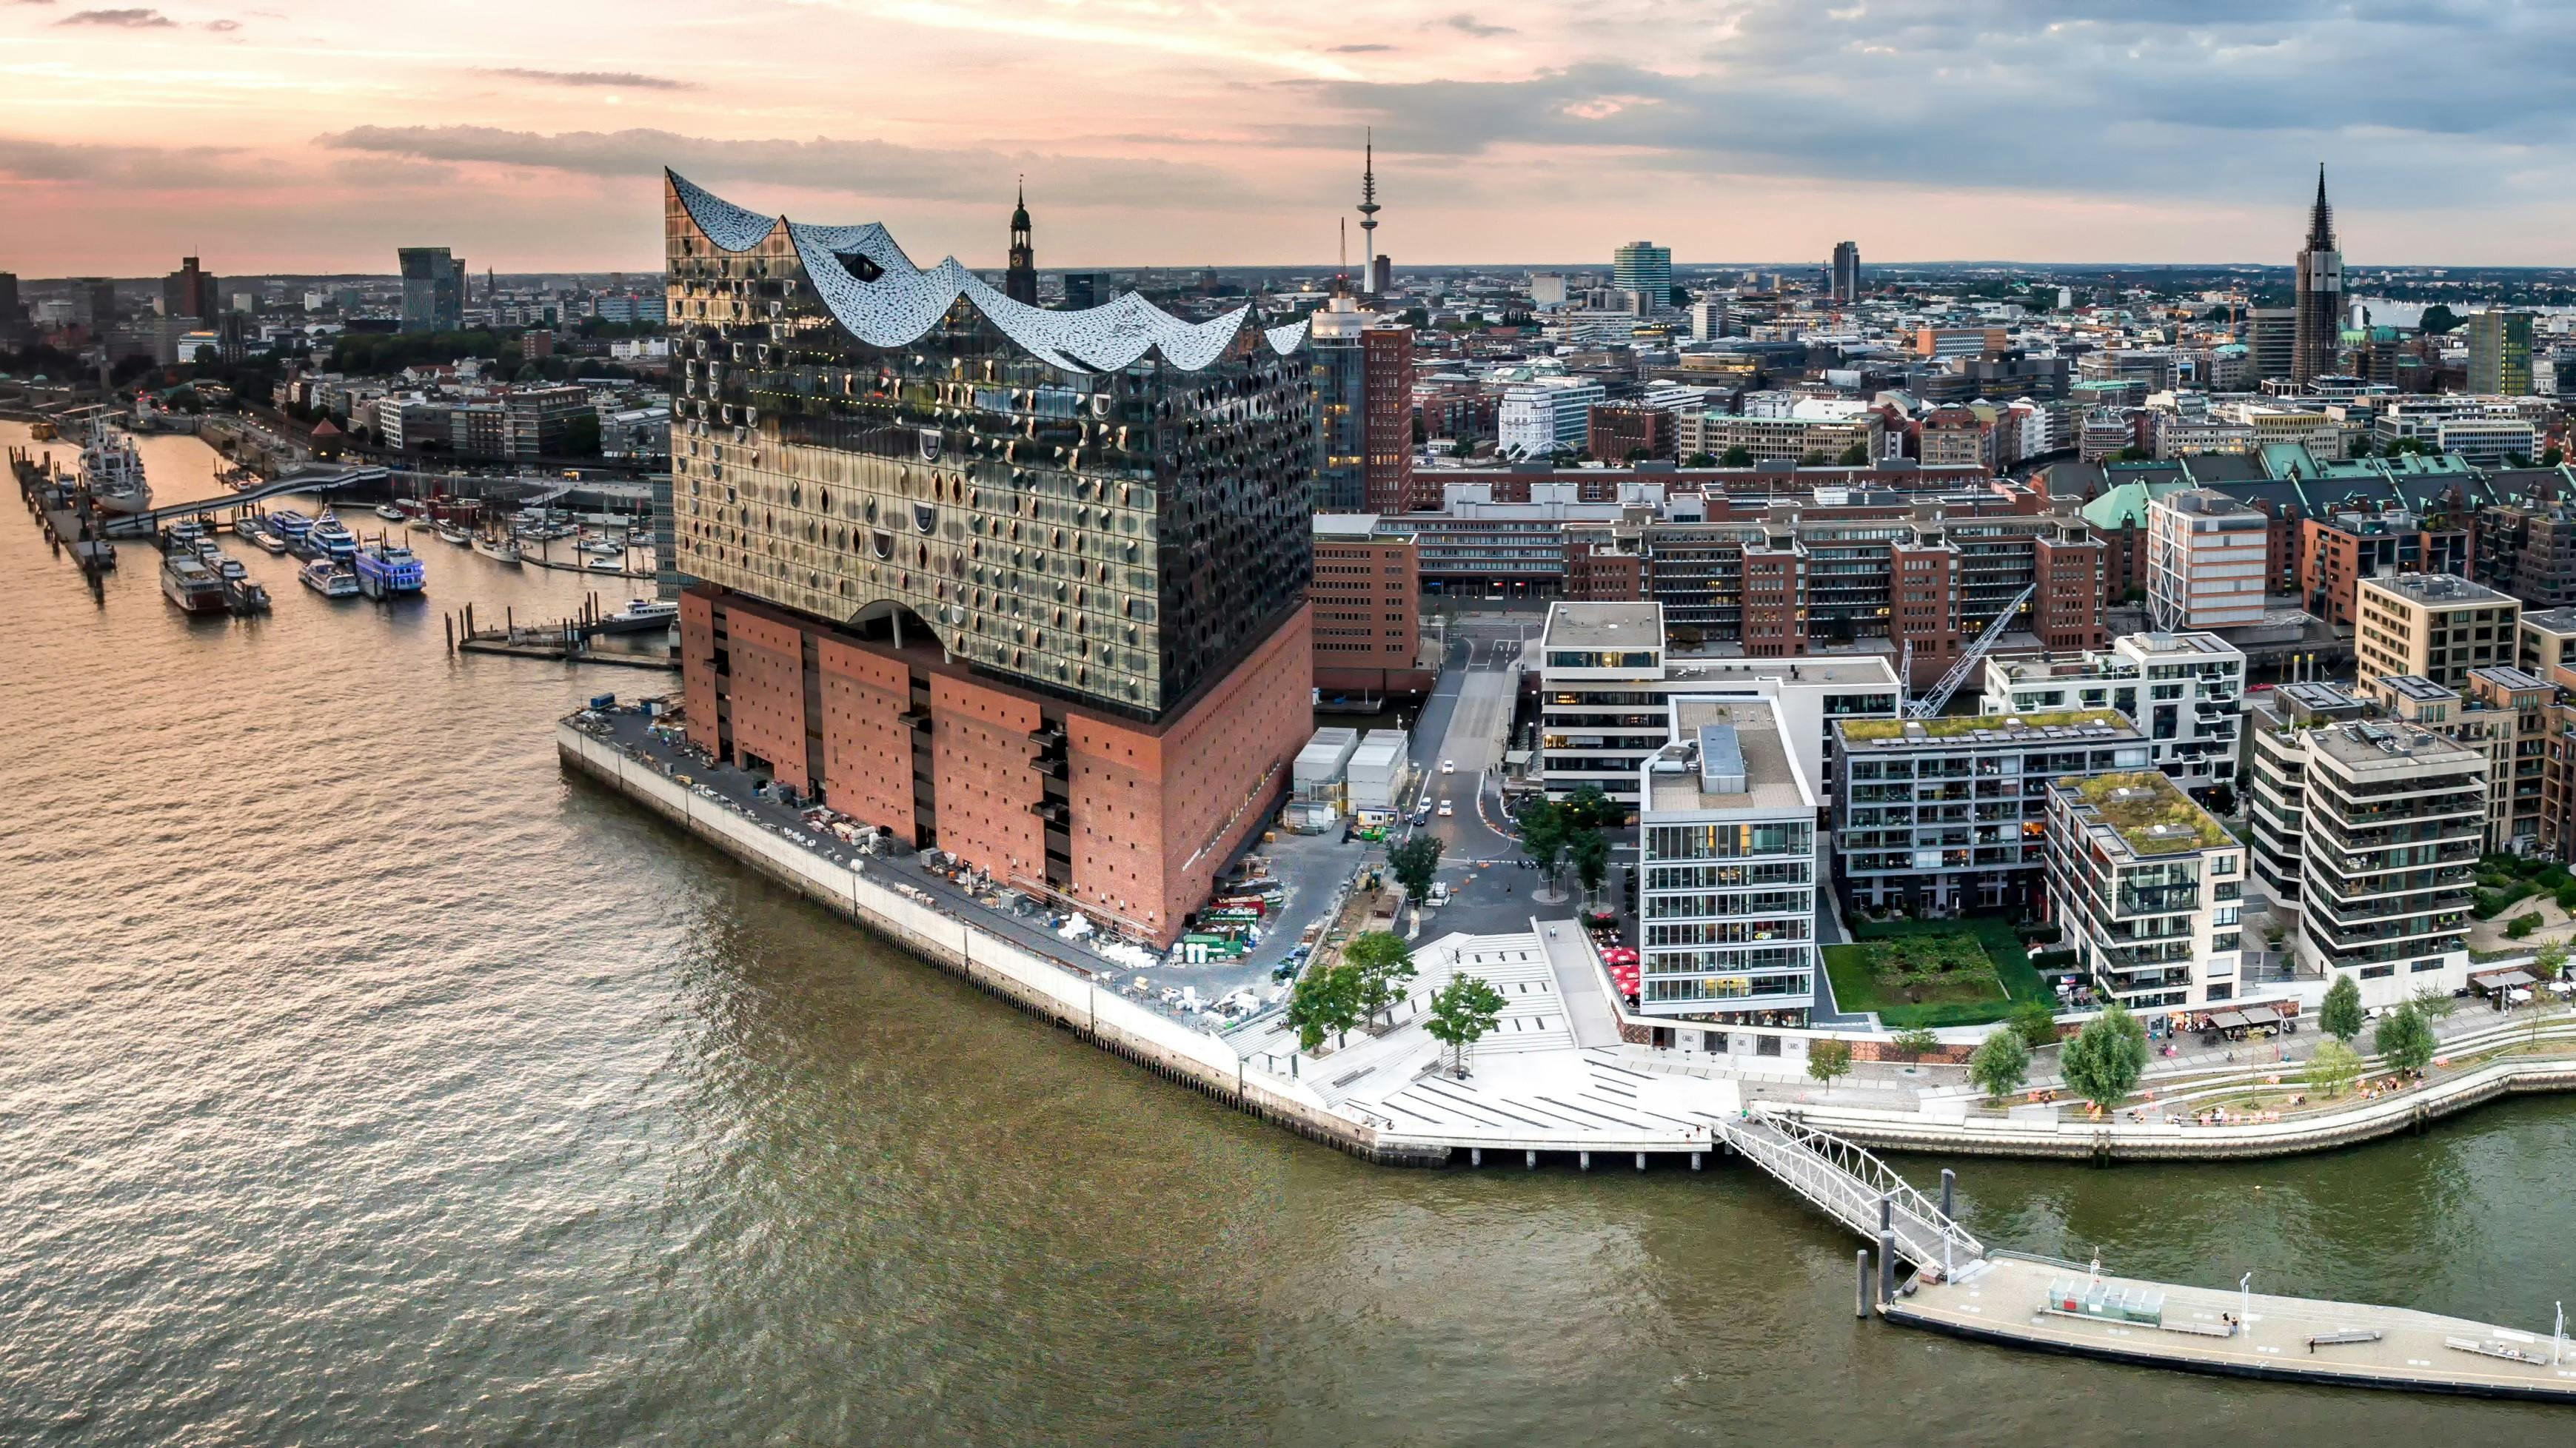 Food tour with Elbphilharmonie and HafenCity Musement